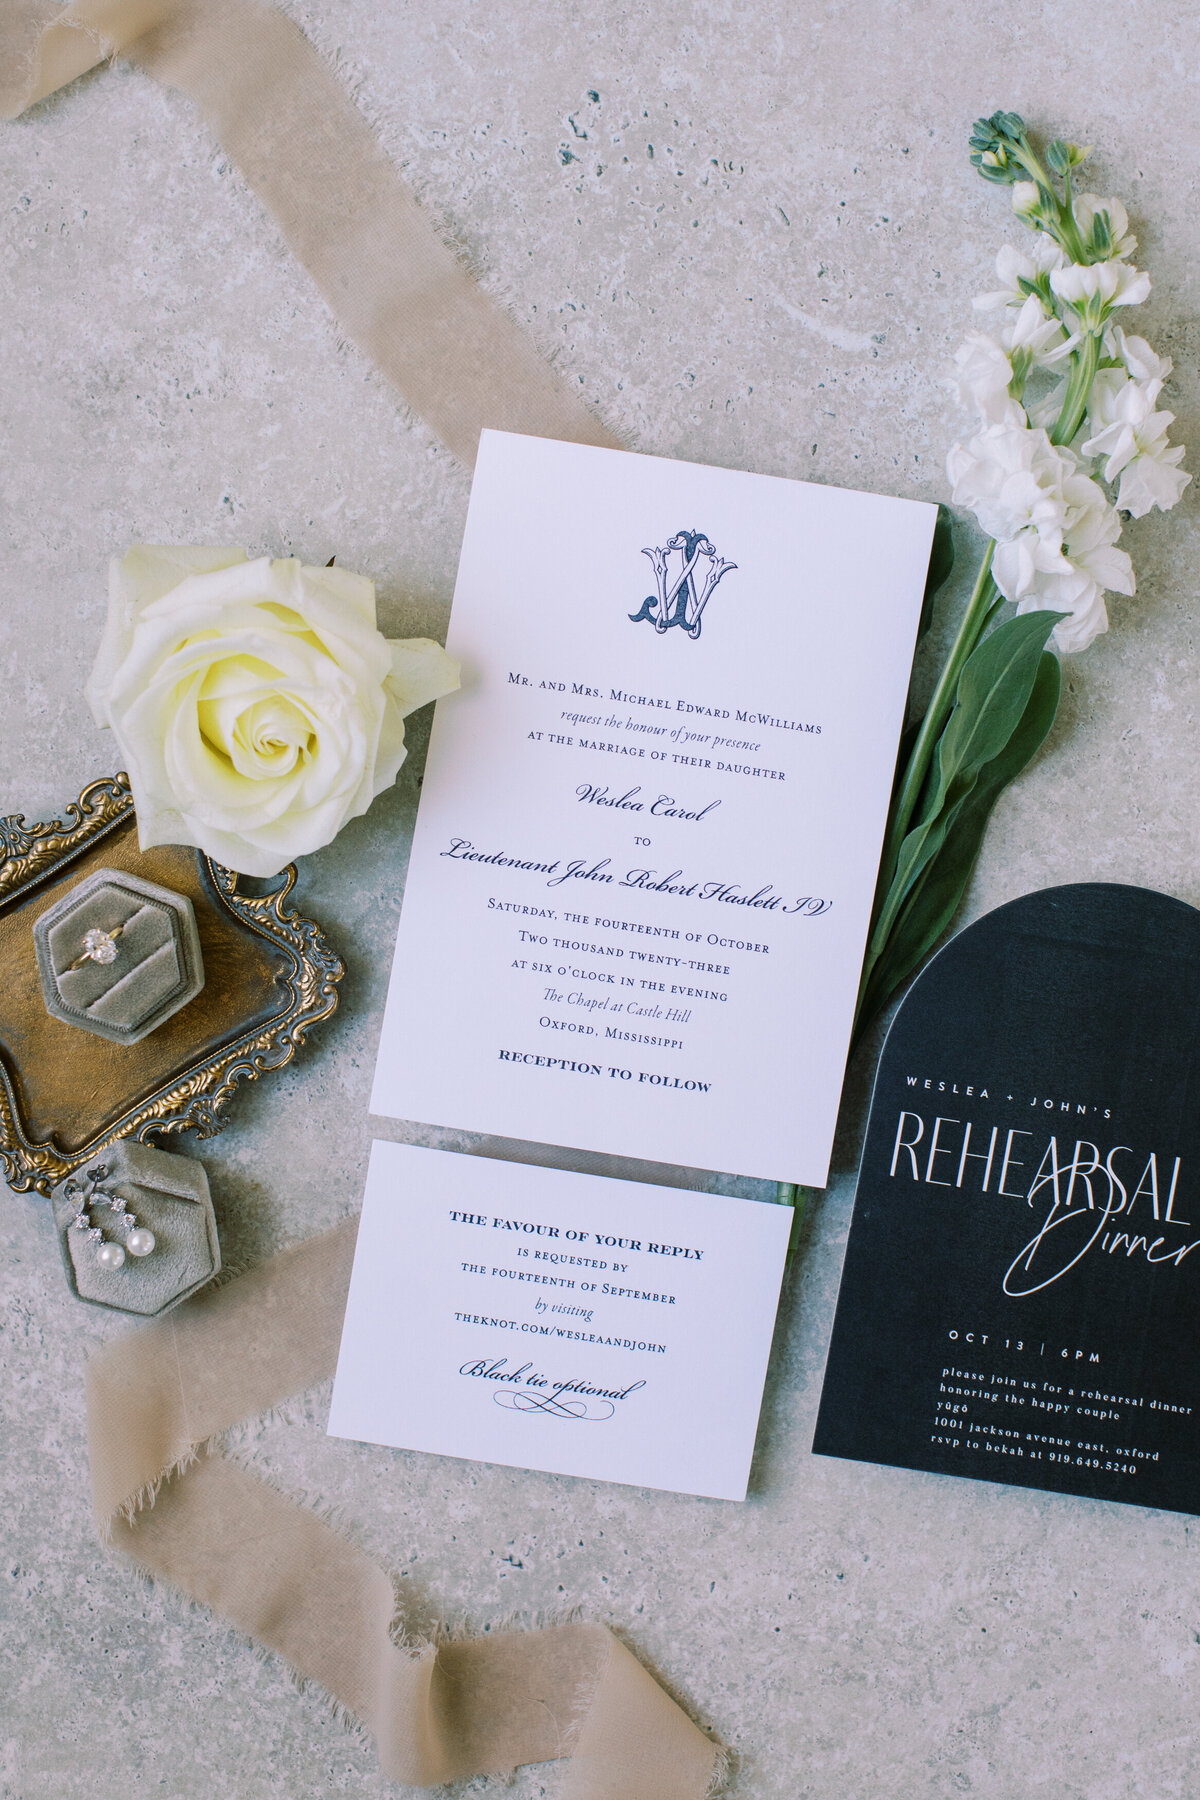 Invitation suite with roses and ribbon